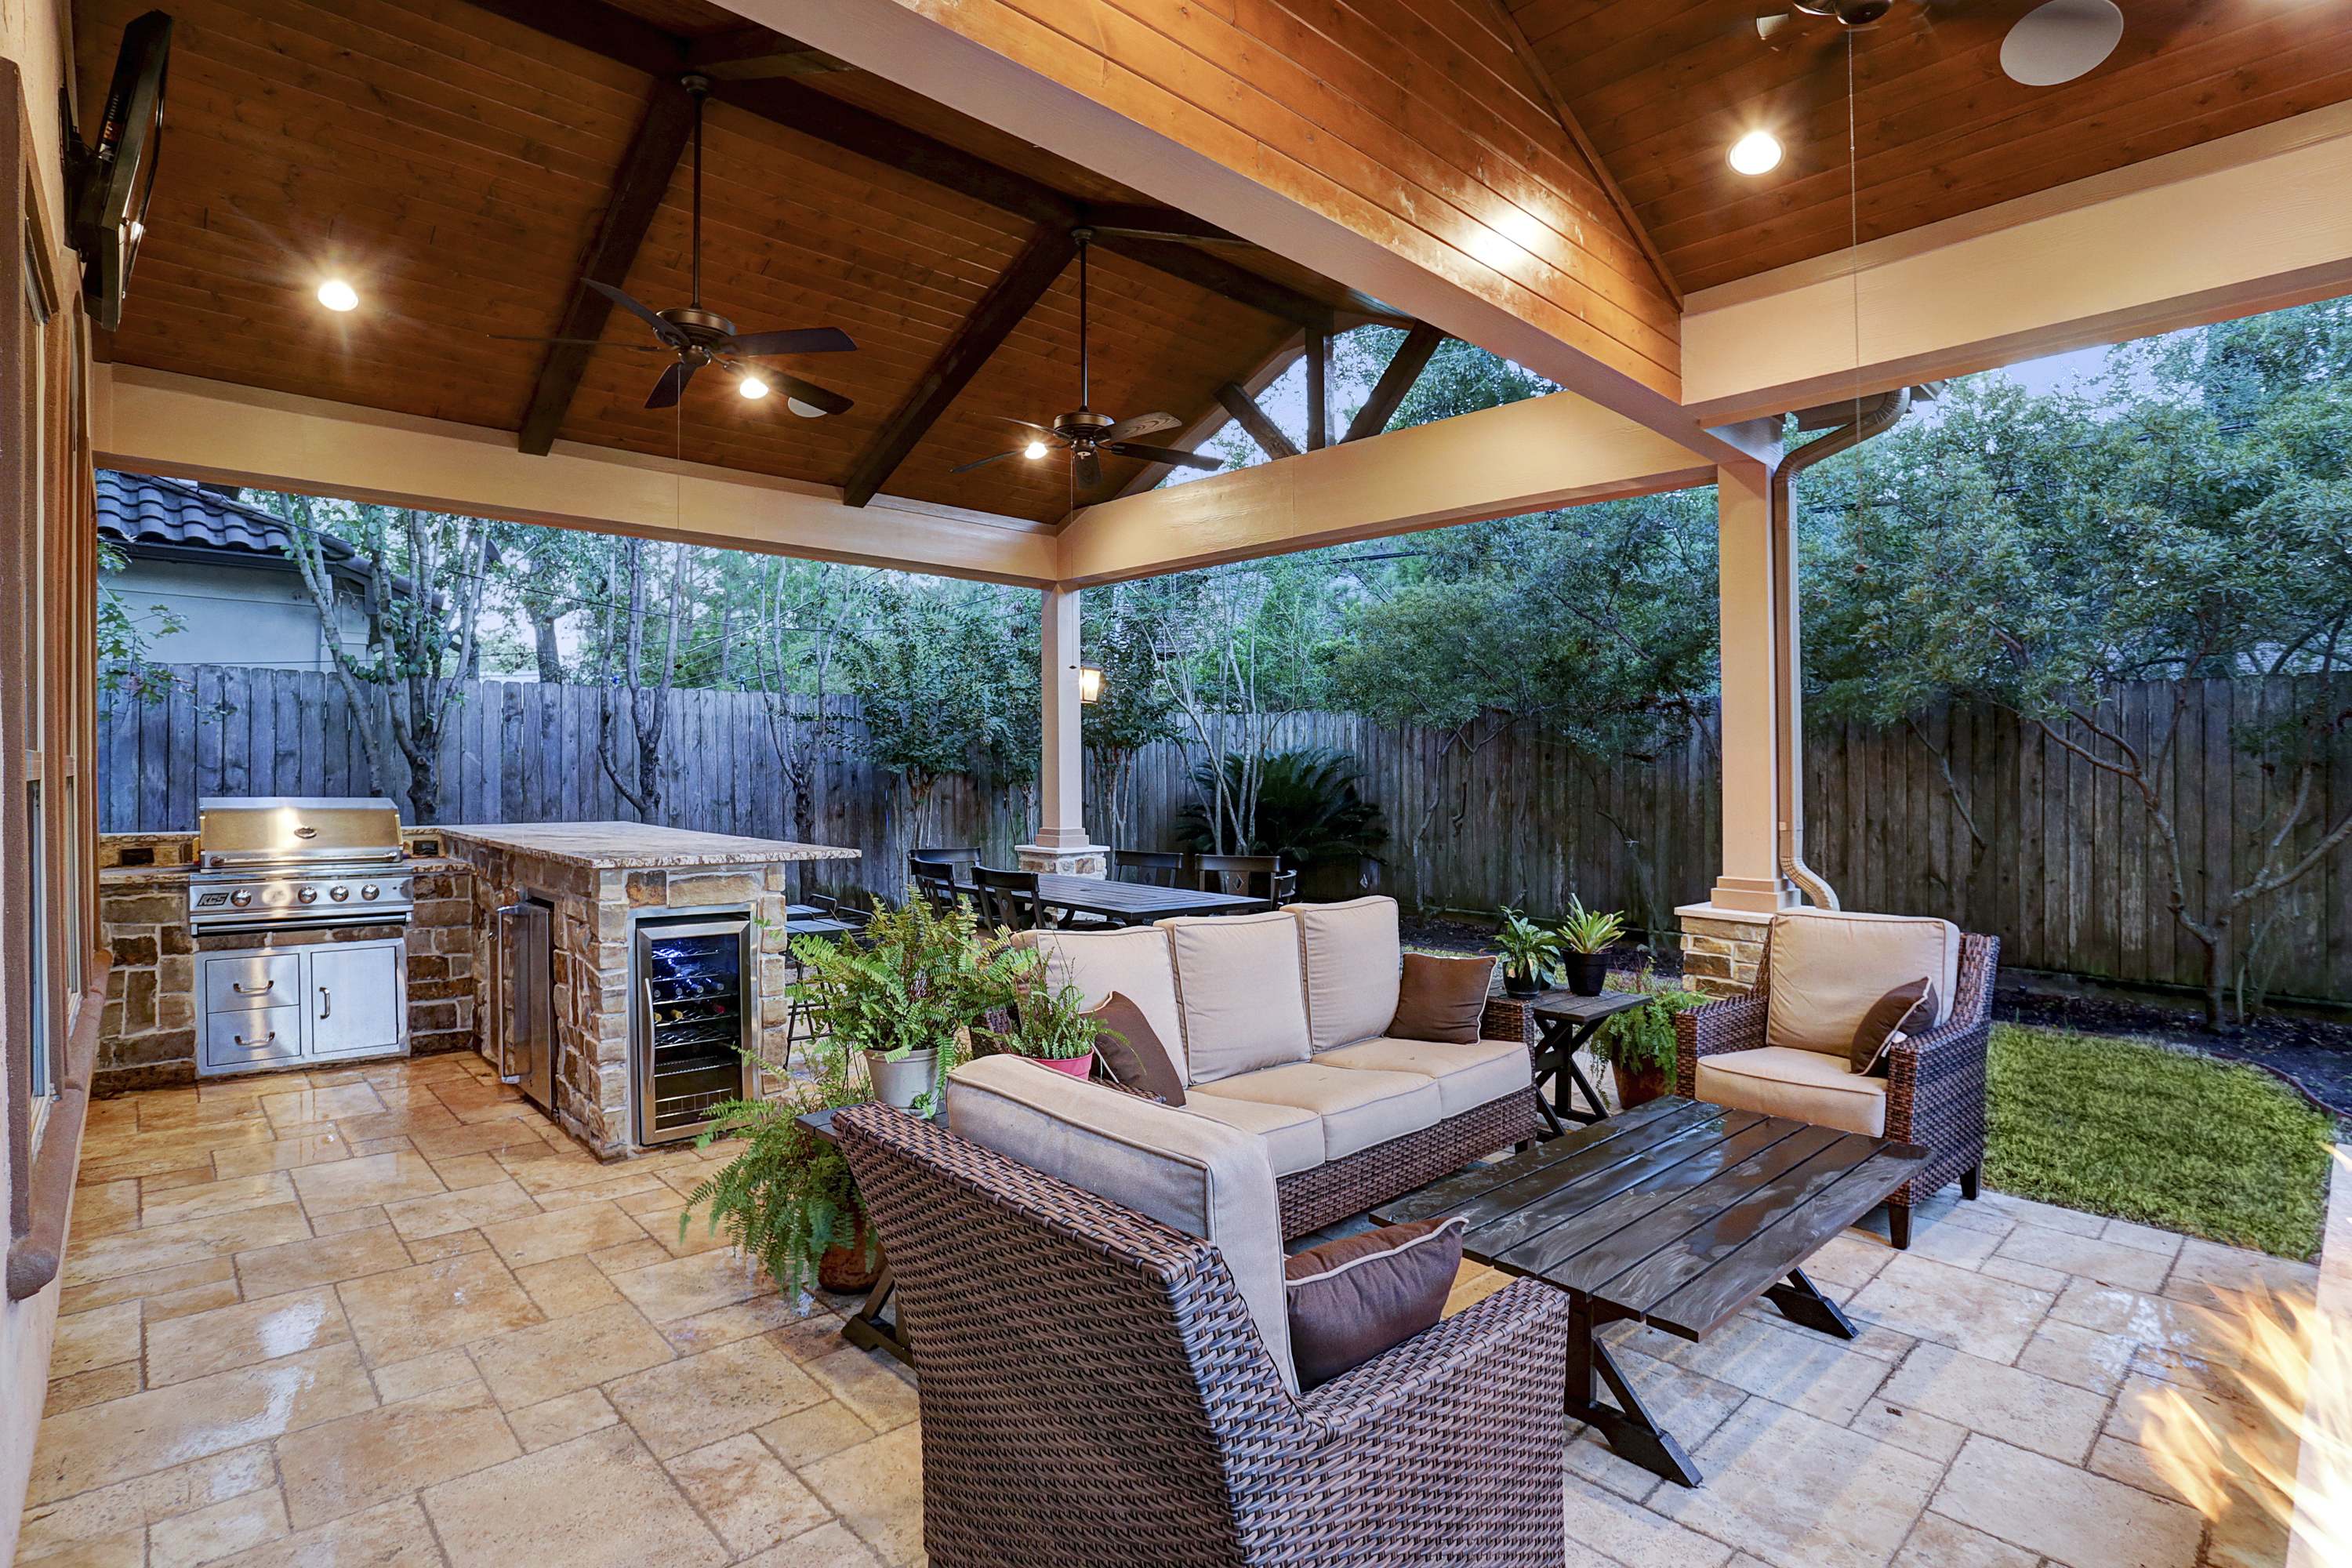 Vaulted Ceiling and Exposed Beams - Texas Custom Patios